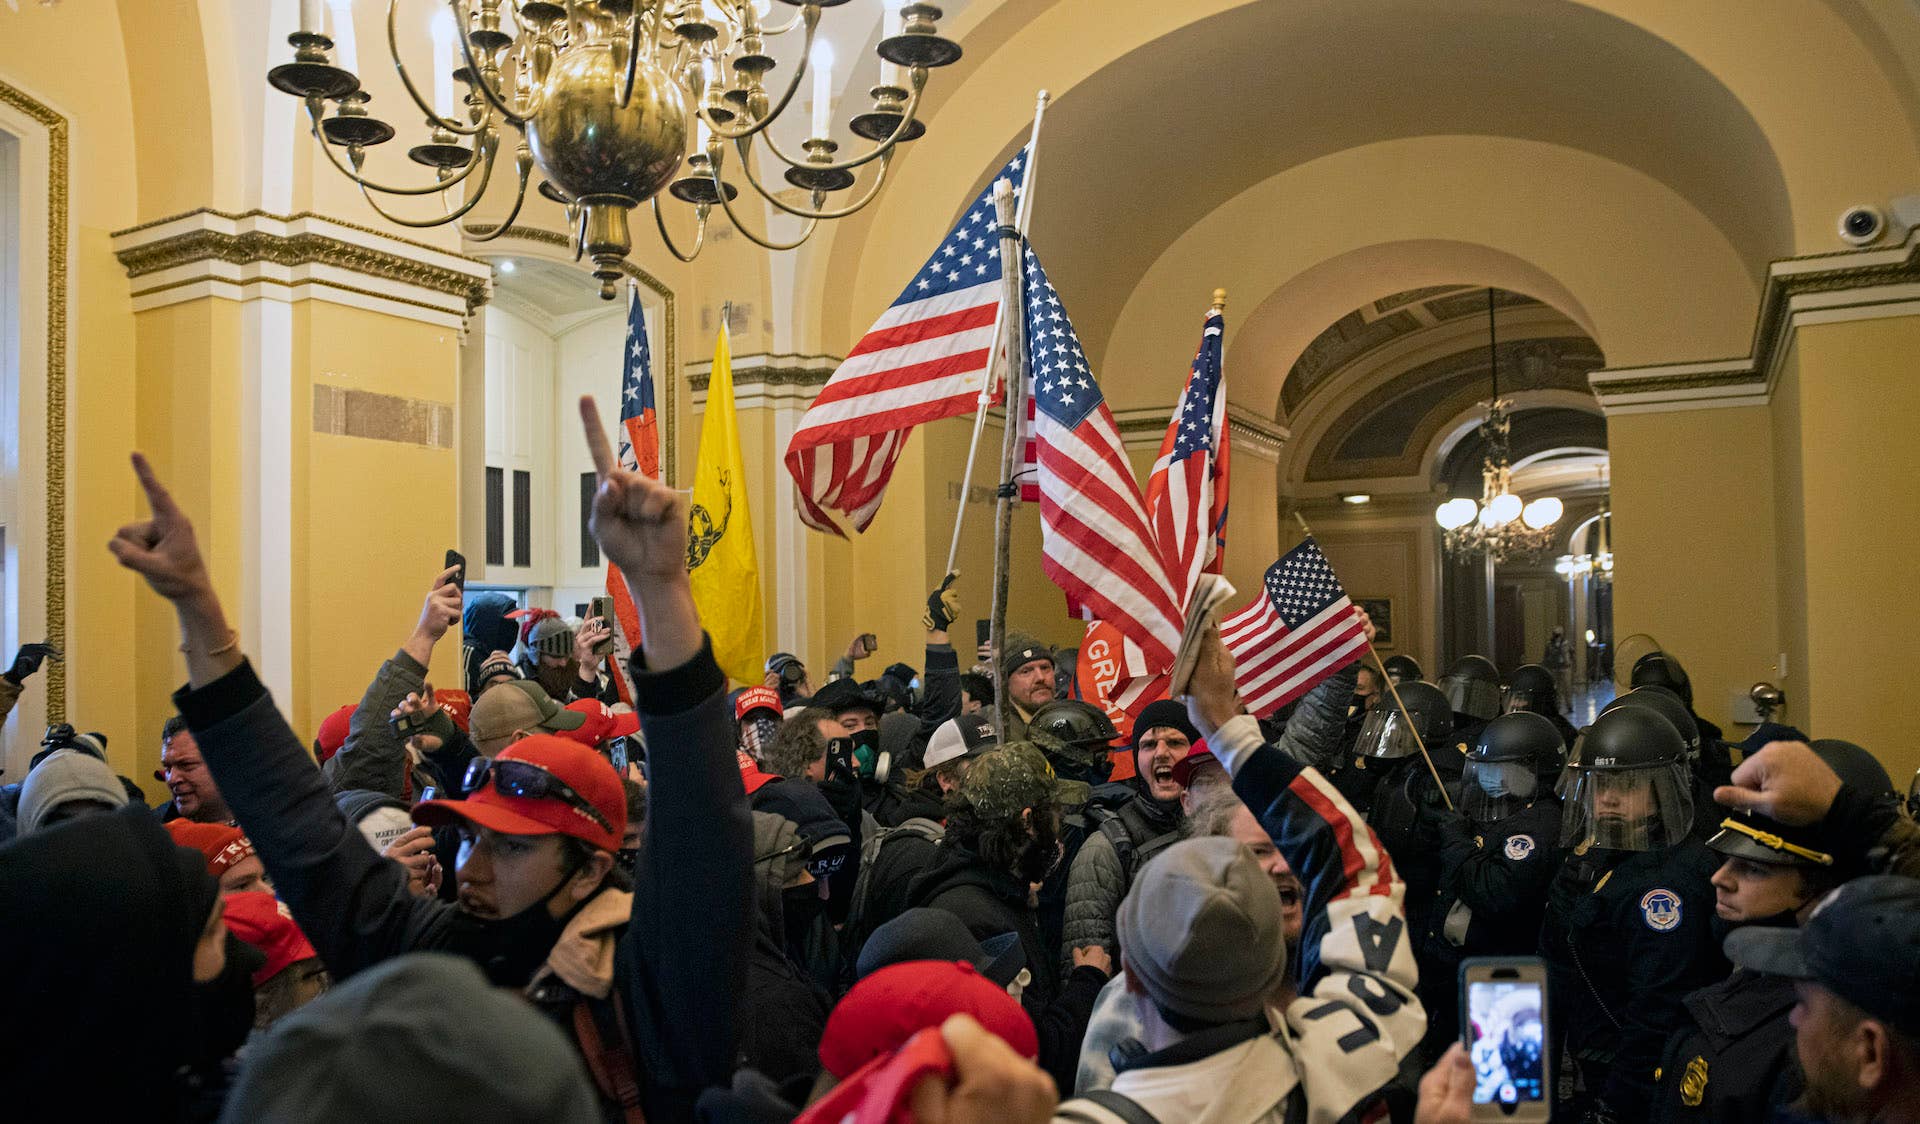 Supporters of Donald Trump storm U.S. Capitol on January 6, 2021